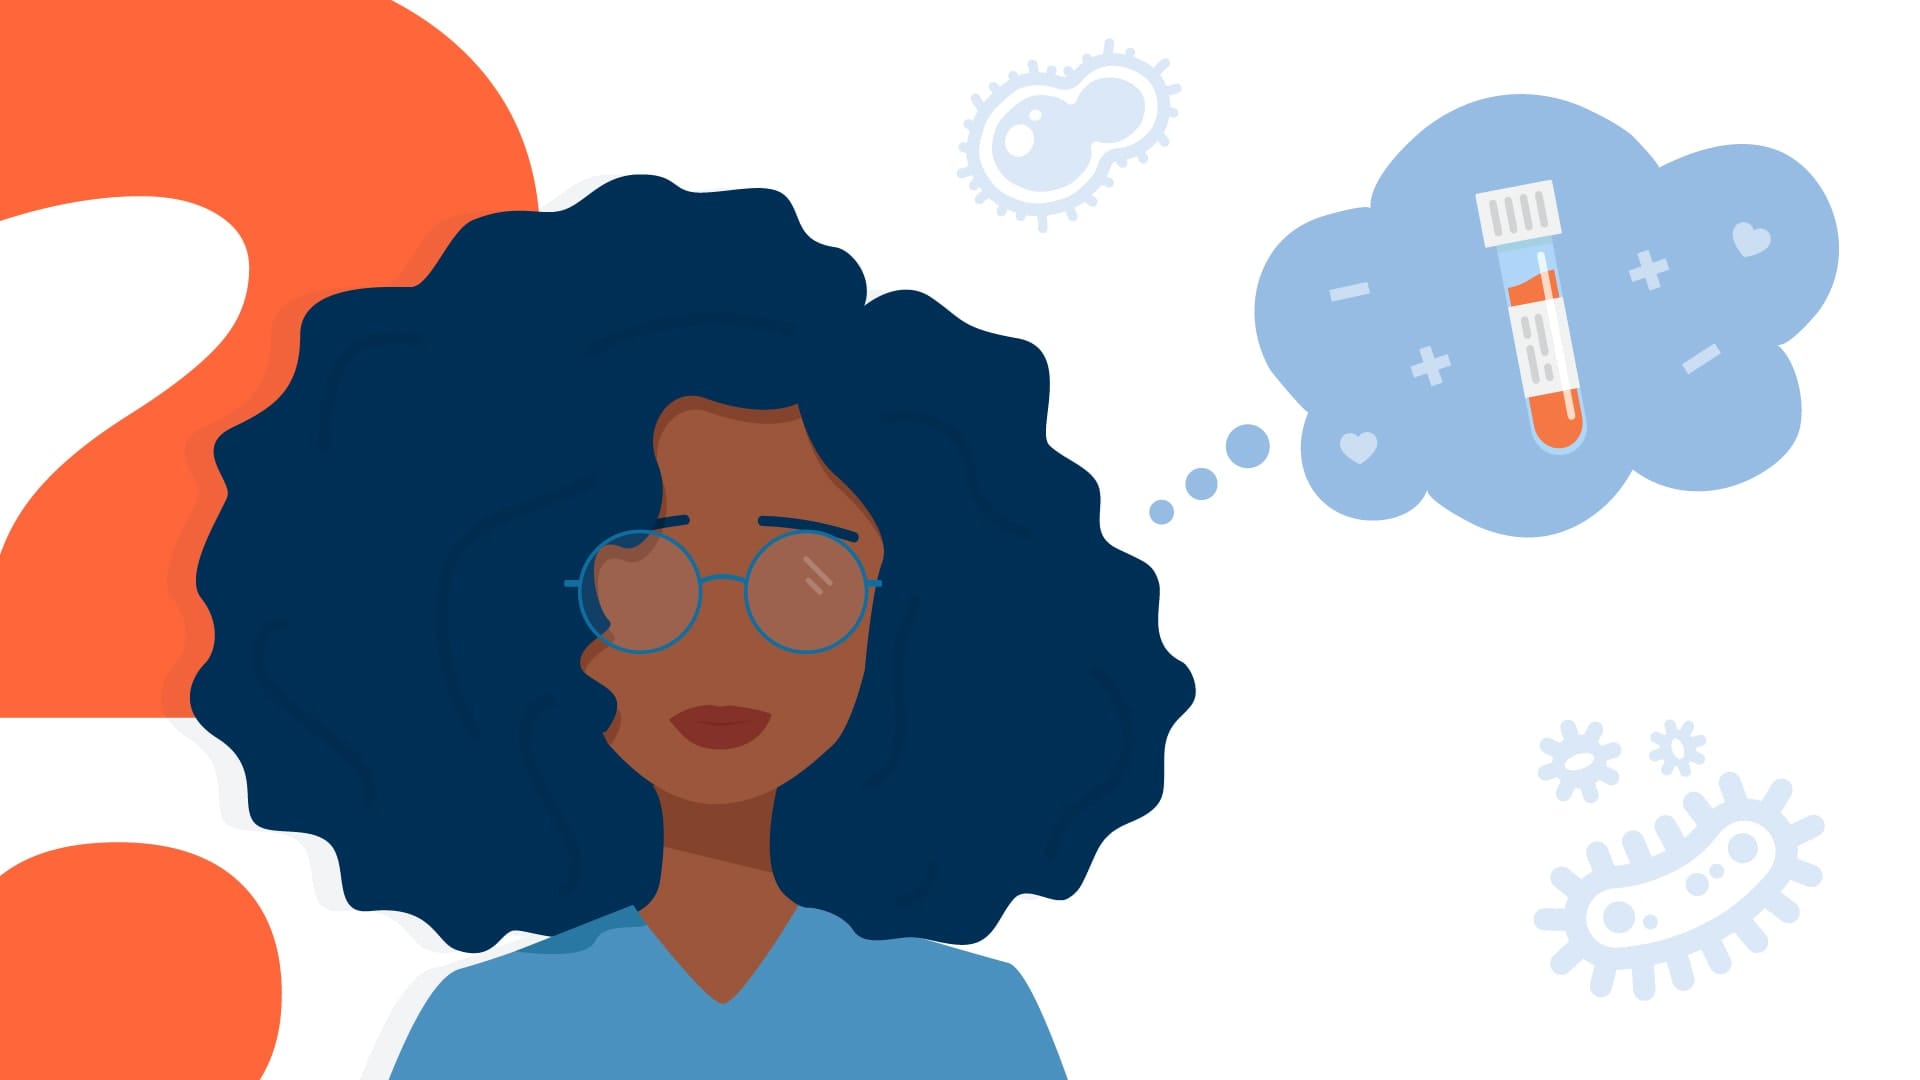 Woman with glasses with thought bubble above her head.